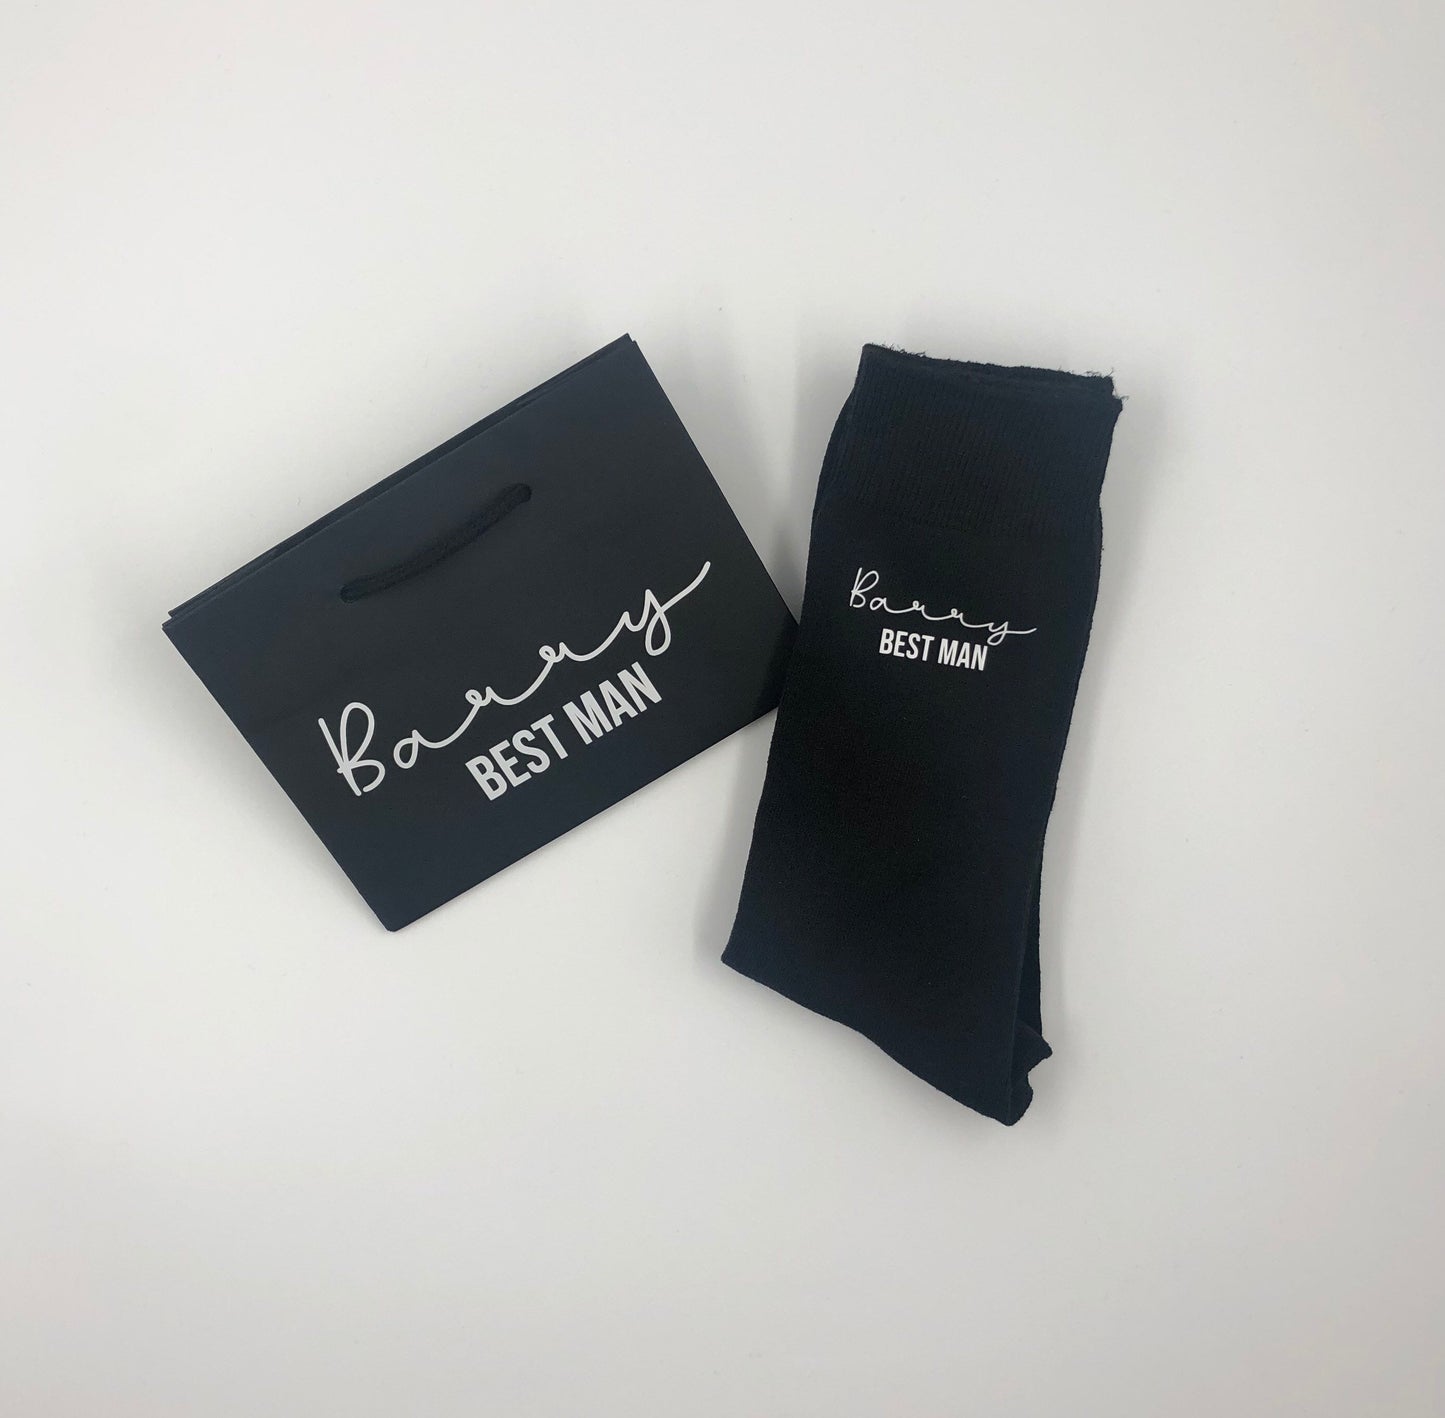 Personalised black socks with matching small black gift bag - best man, groom, father of the bride, father of the groom, groomsman